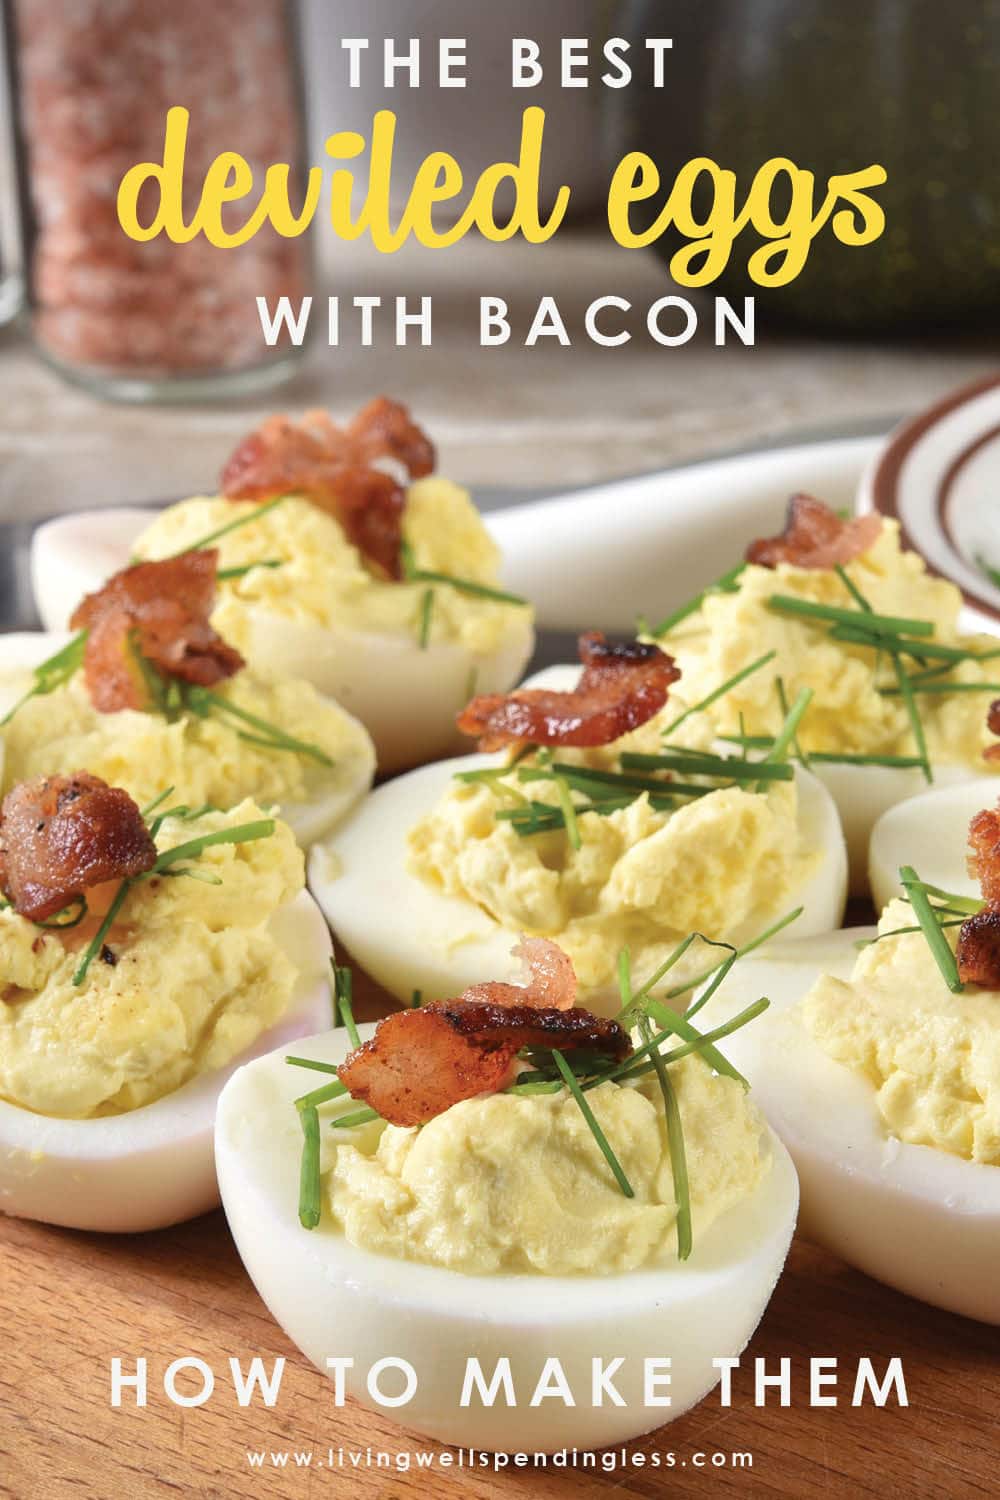 The Best Deviled Eggs with Bacon - How to Make Them